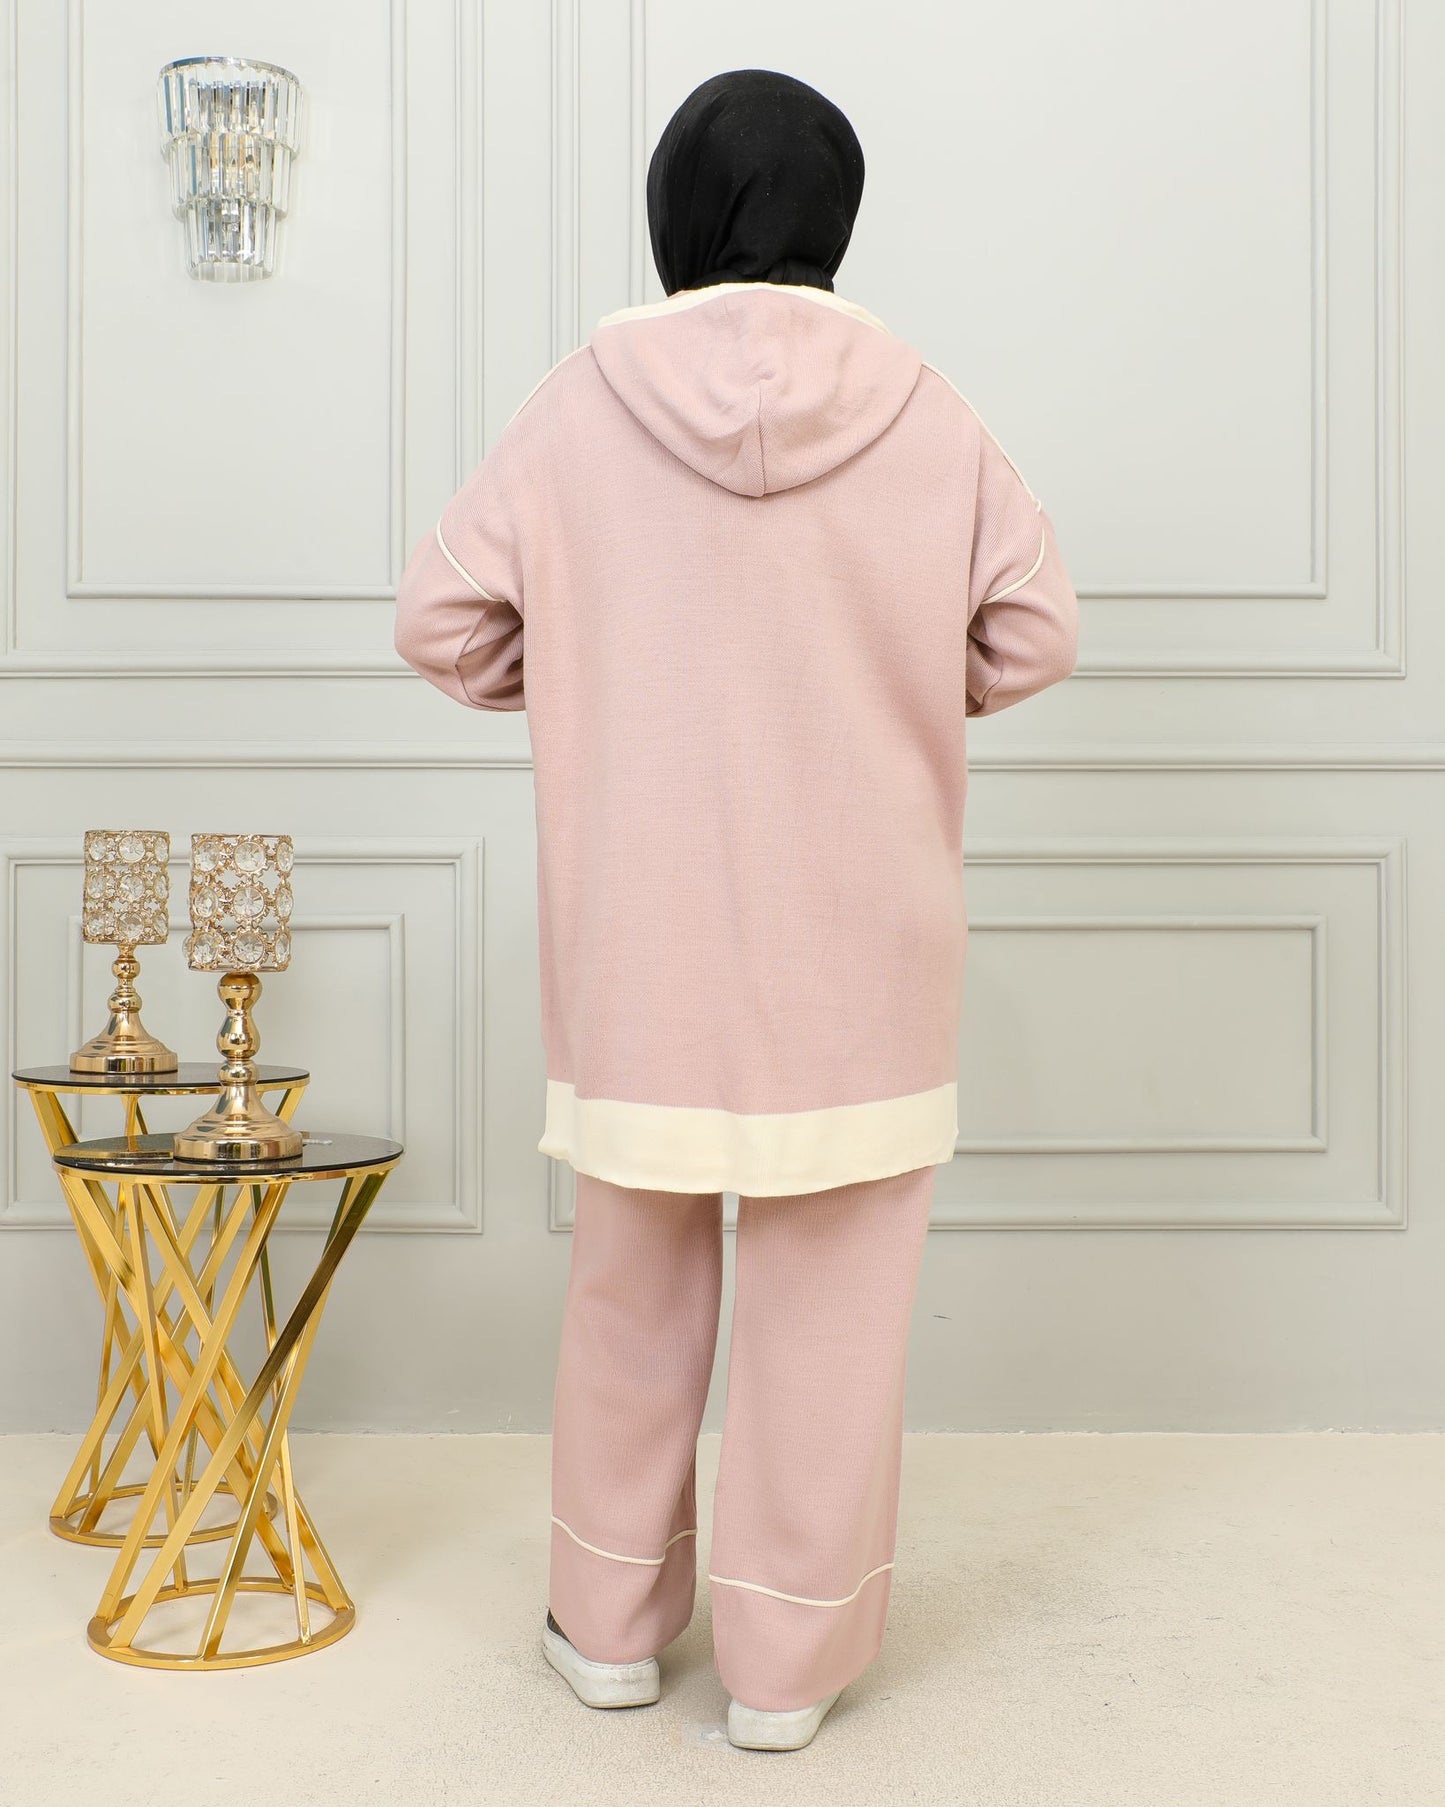 Tima hooded co-ord